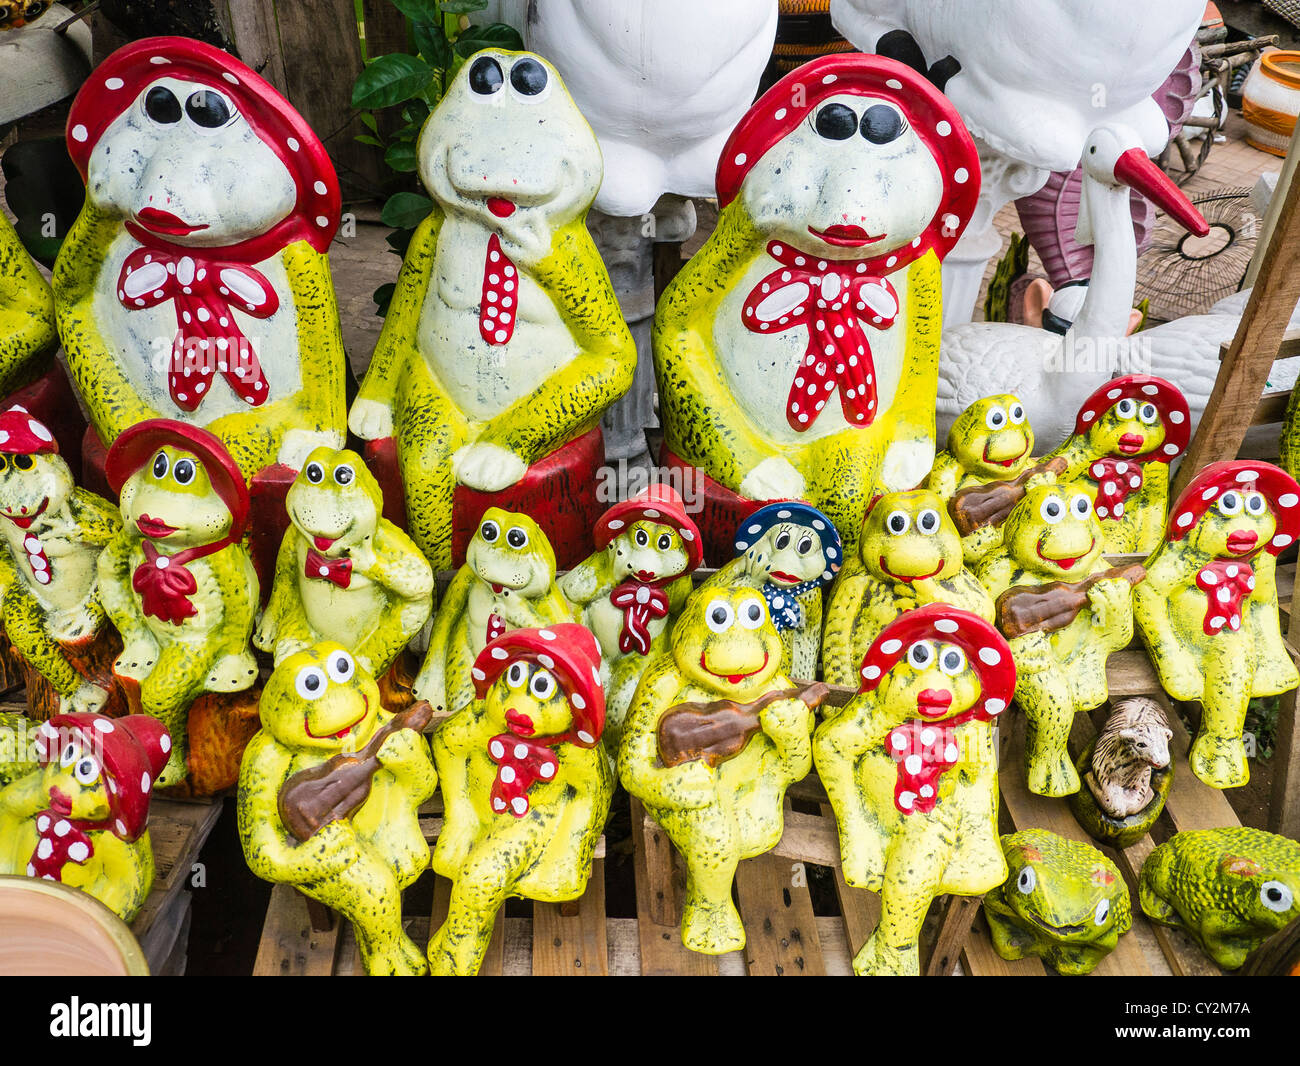 A group of silly looking yellow-green frogs kitsch lawn art for sale at a street market in Asunción Paraguay. Stock Photo